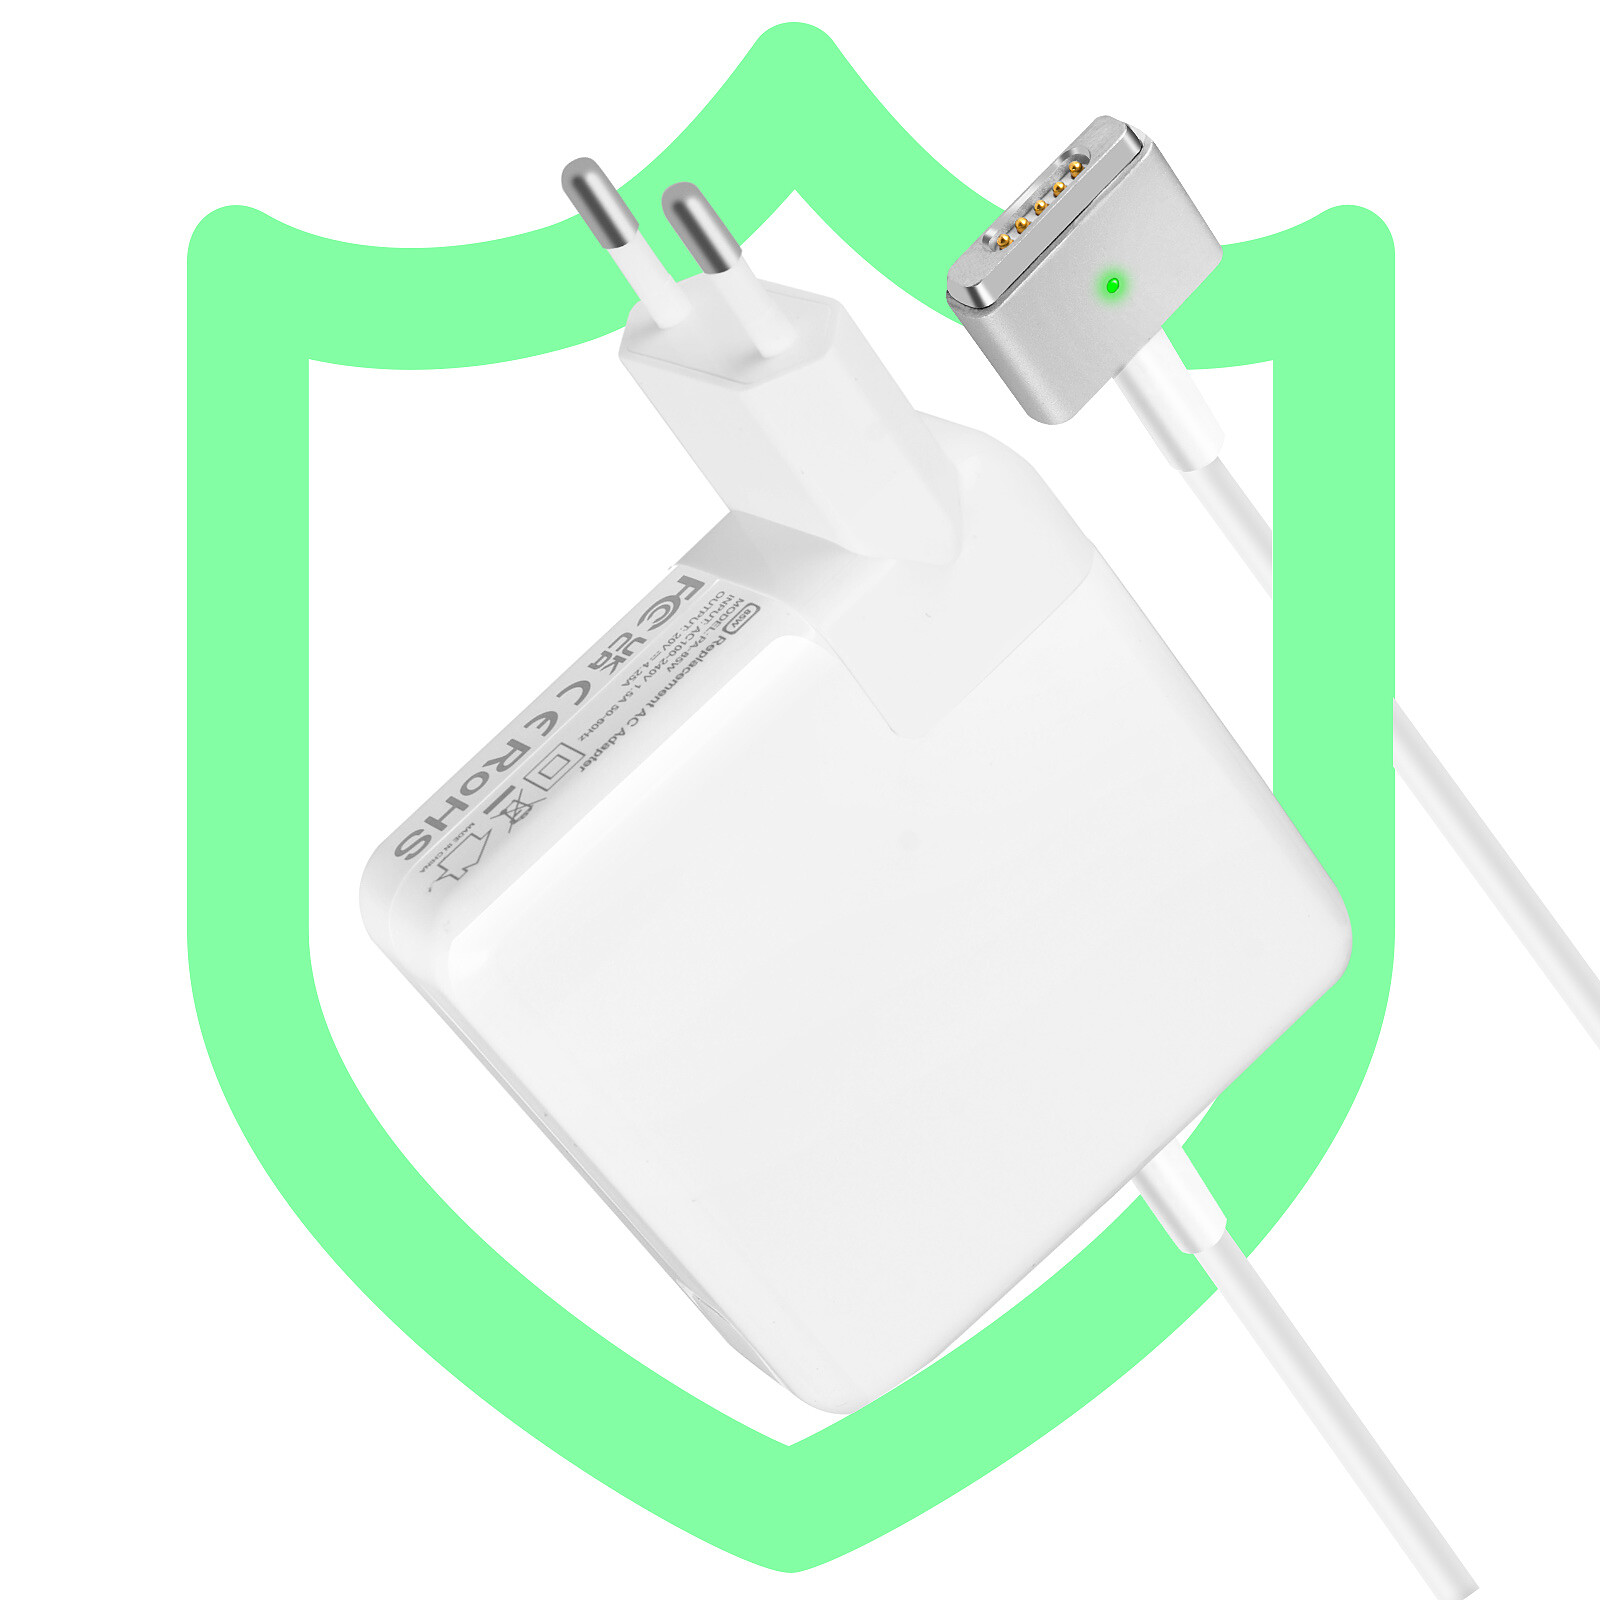 Avizar Chargeur Macbook Magsafe 2 Magnétique Charge Rapide 45W